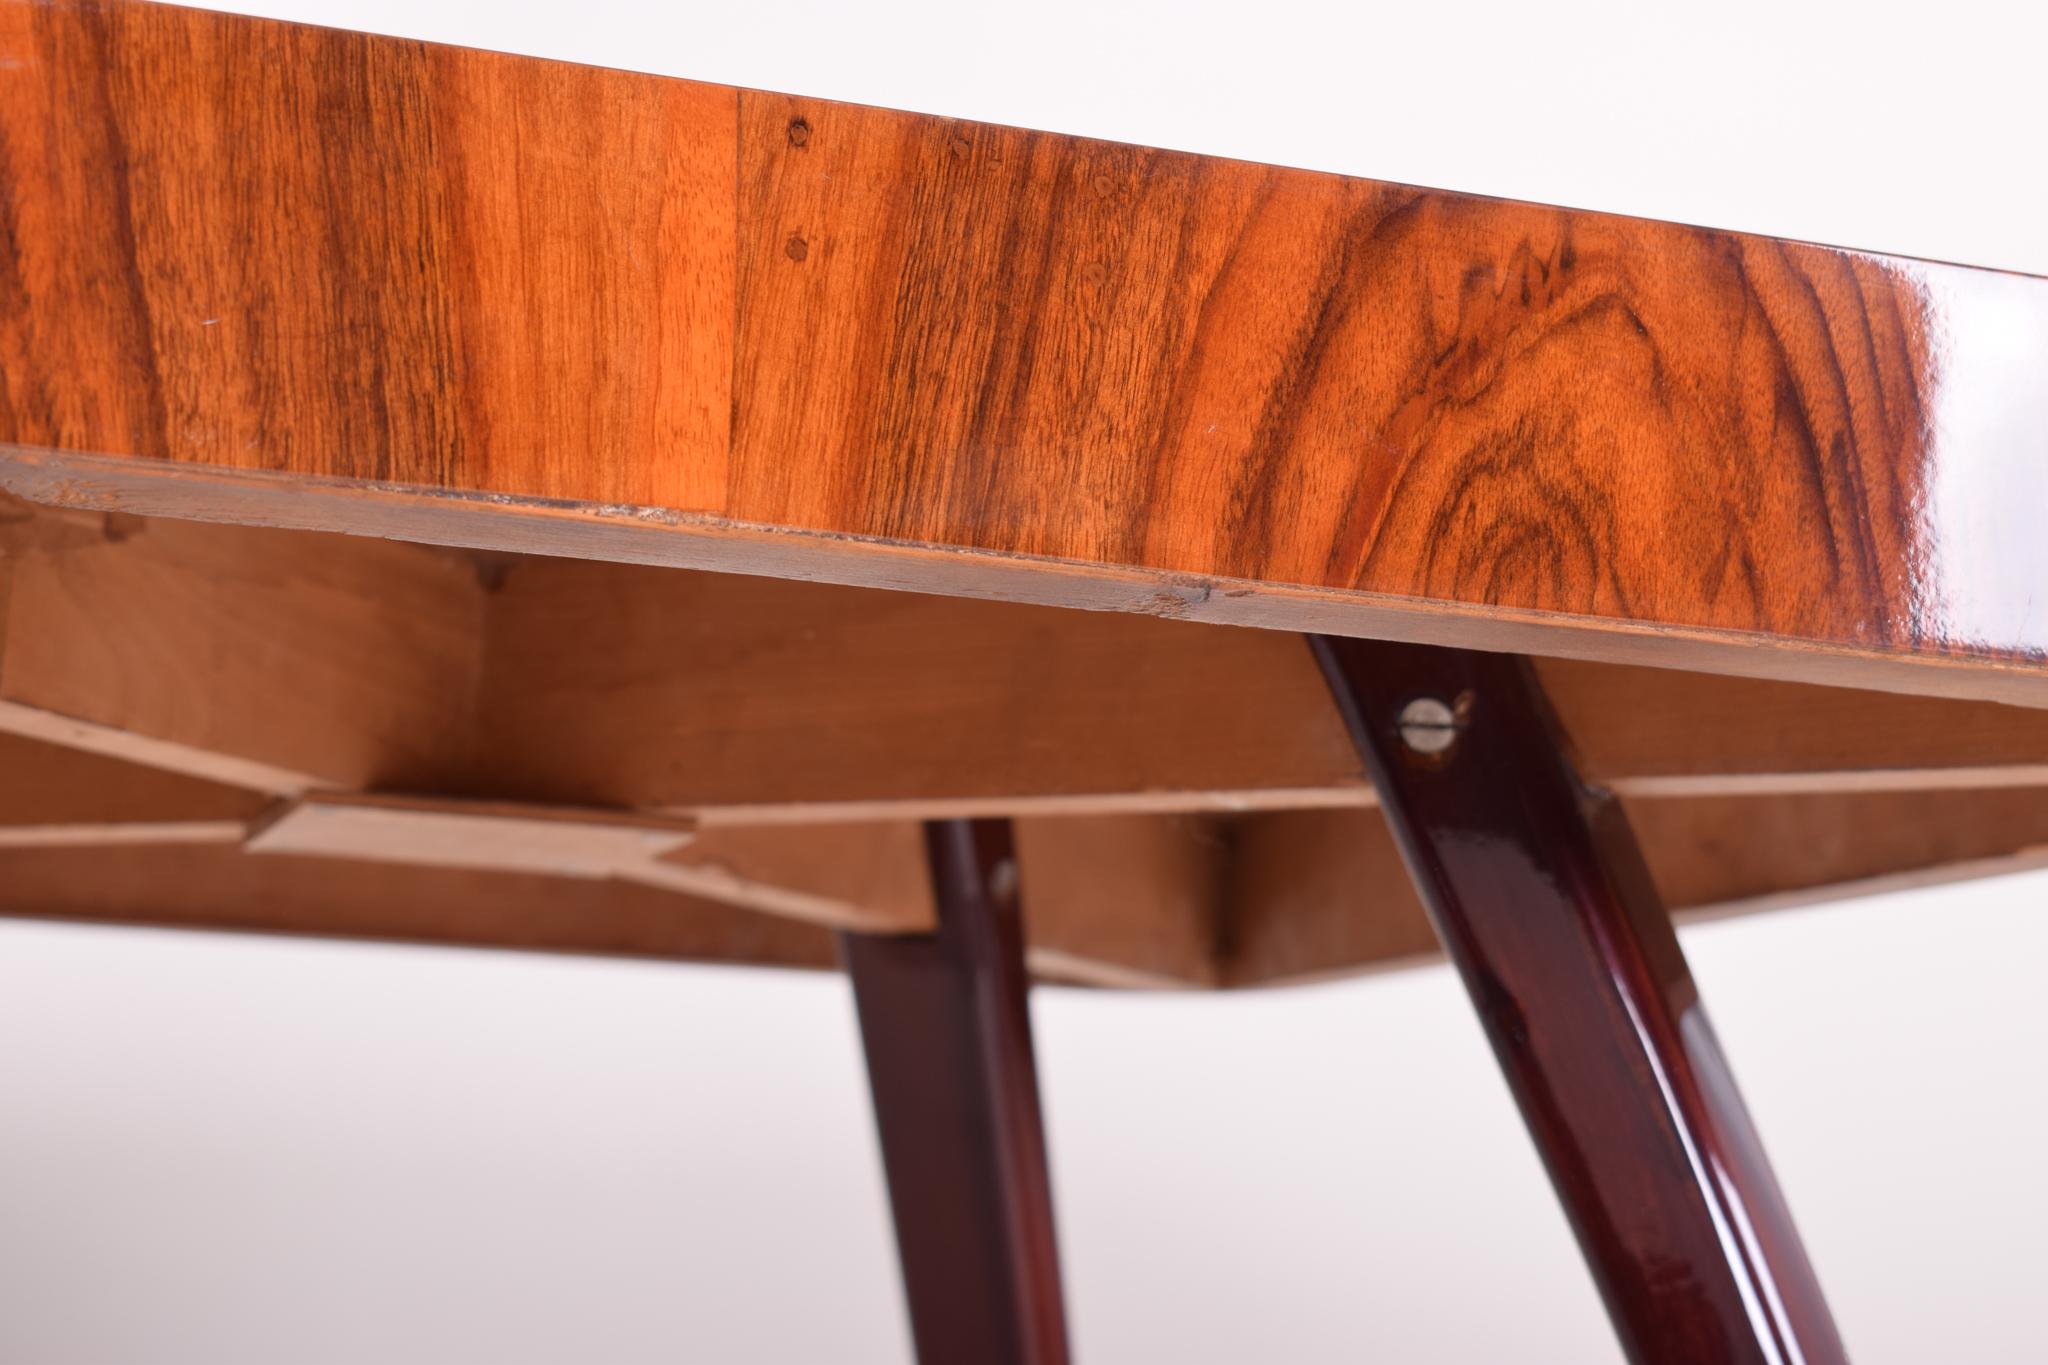 Wood Small Brown Pavóuk Table, Designed by Halabala, 1940s, Made in Czechia For Sale